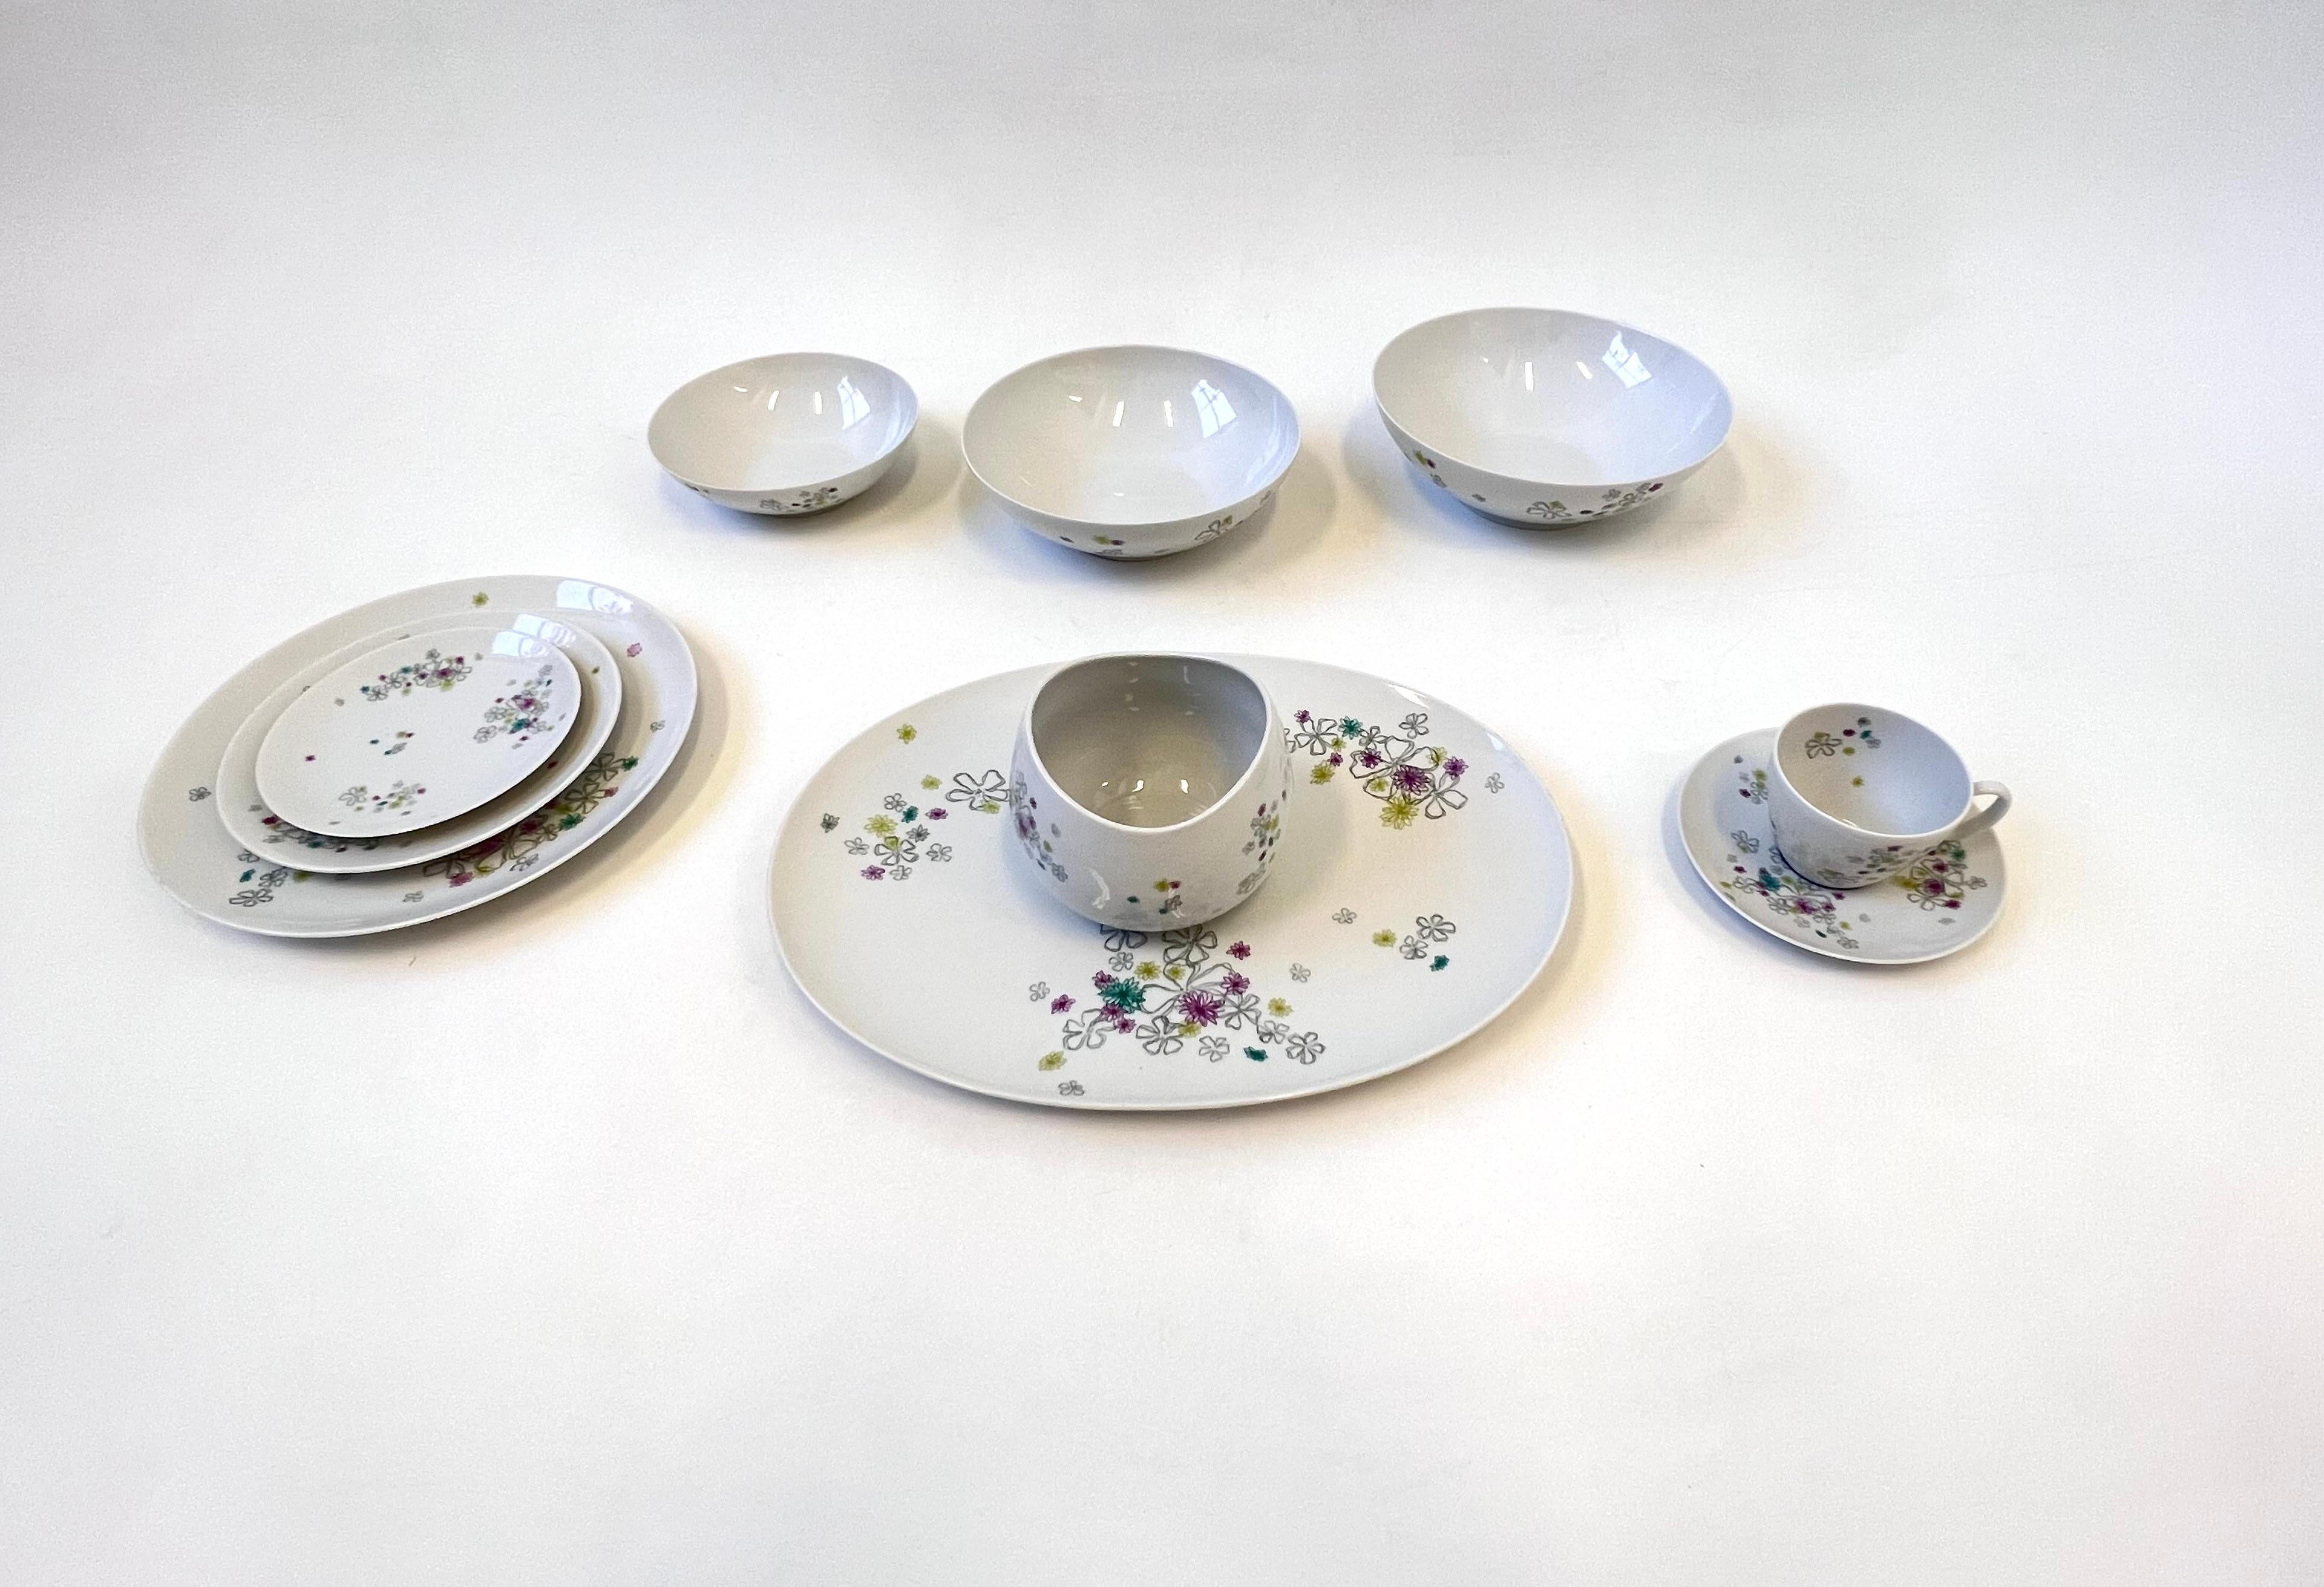 German porcelain china dinnerware service for 12 by renowned American designer Raymond Loewy. 
The set consists of 12 dinner plate, 12 Salad plate, 12 Desert plate, 12 Cup and saucer. 
One serving plater, three serving bowls and one gravy bowl. 